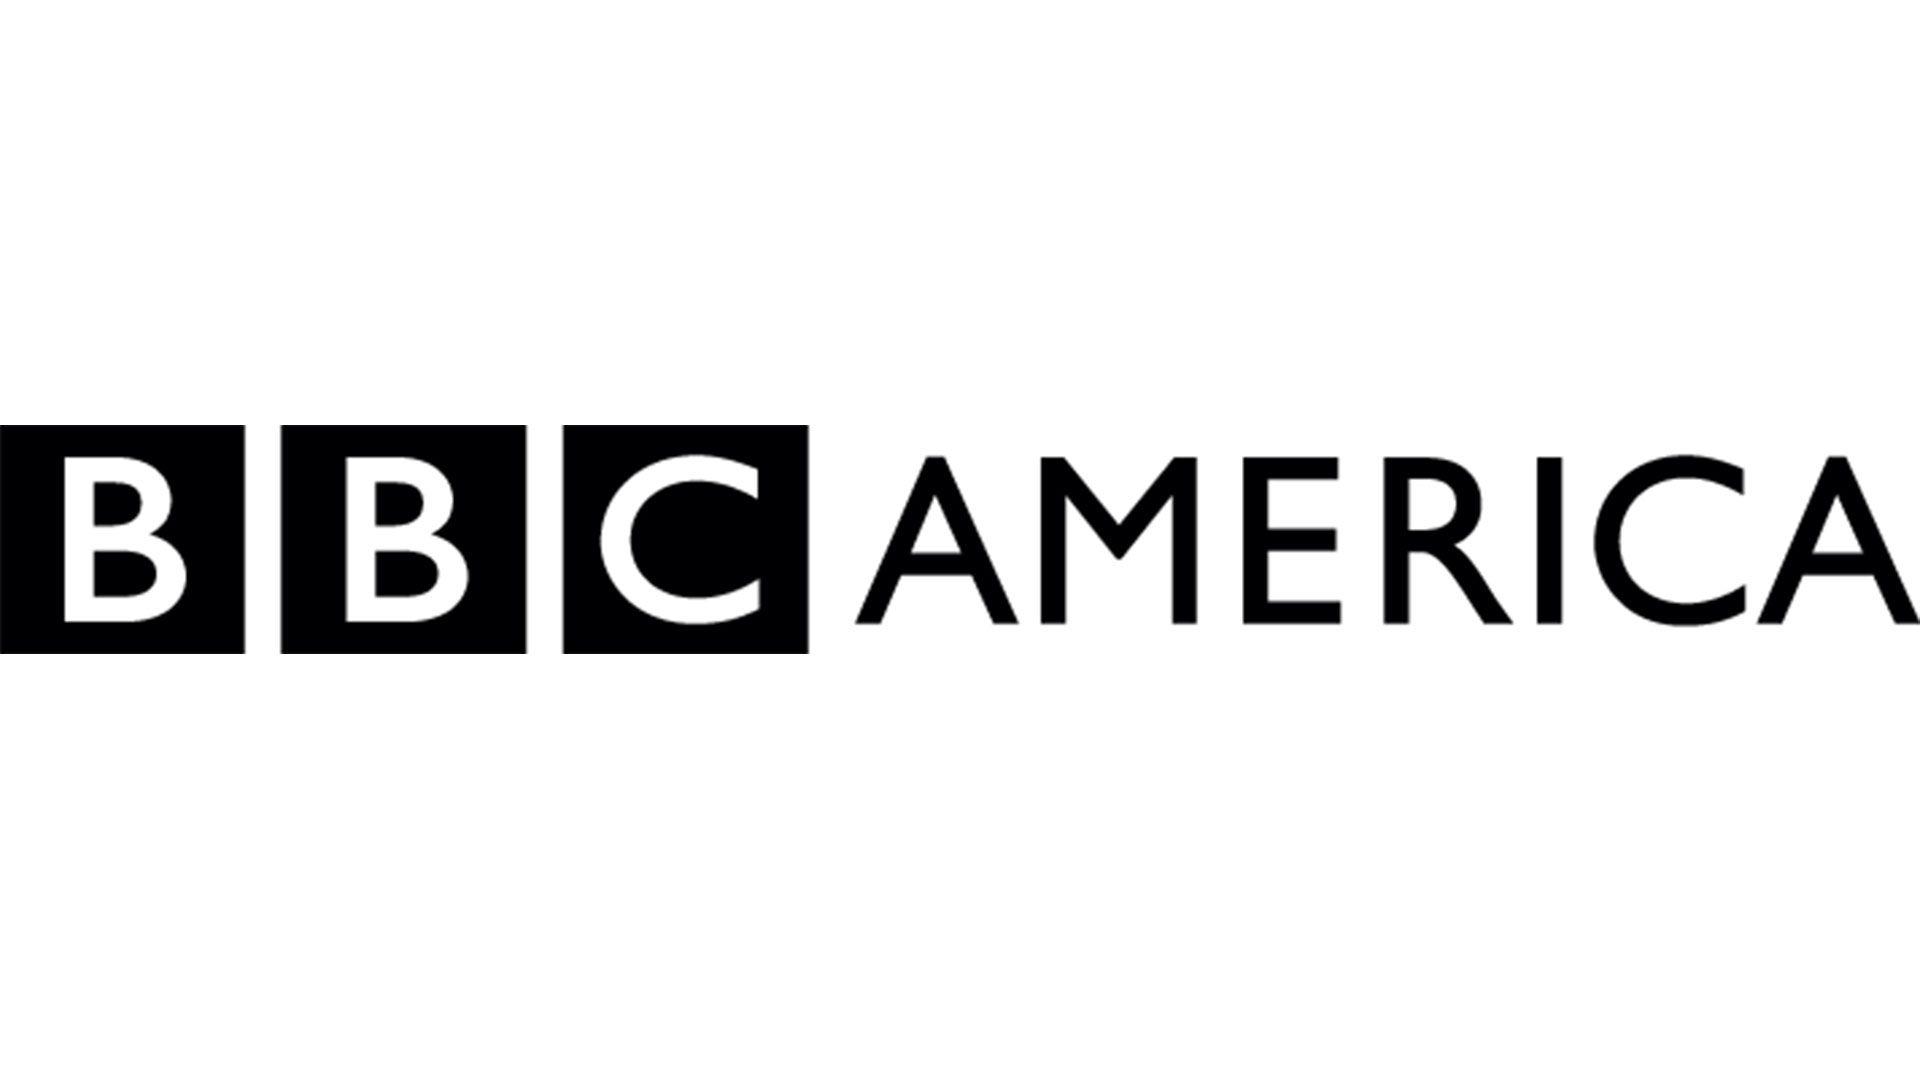 BBCA Logo - Doctor Who' Spin Off, Adele, And New Thriller Come To BBC America